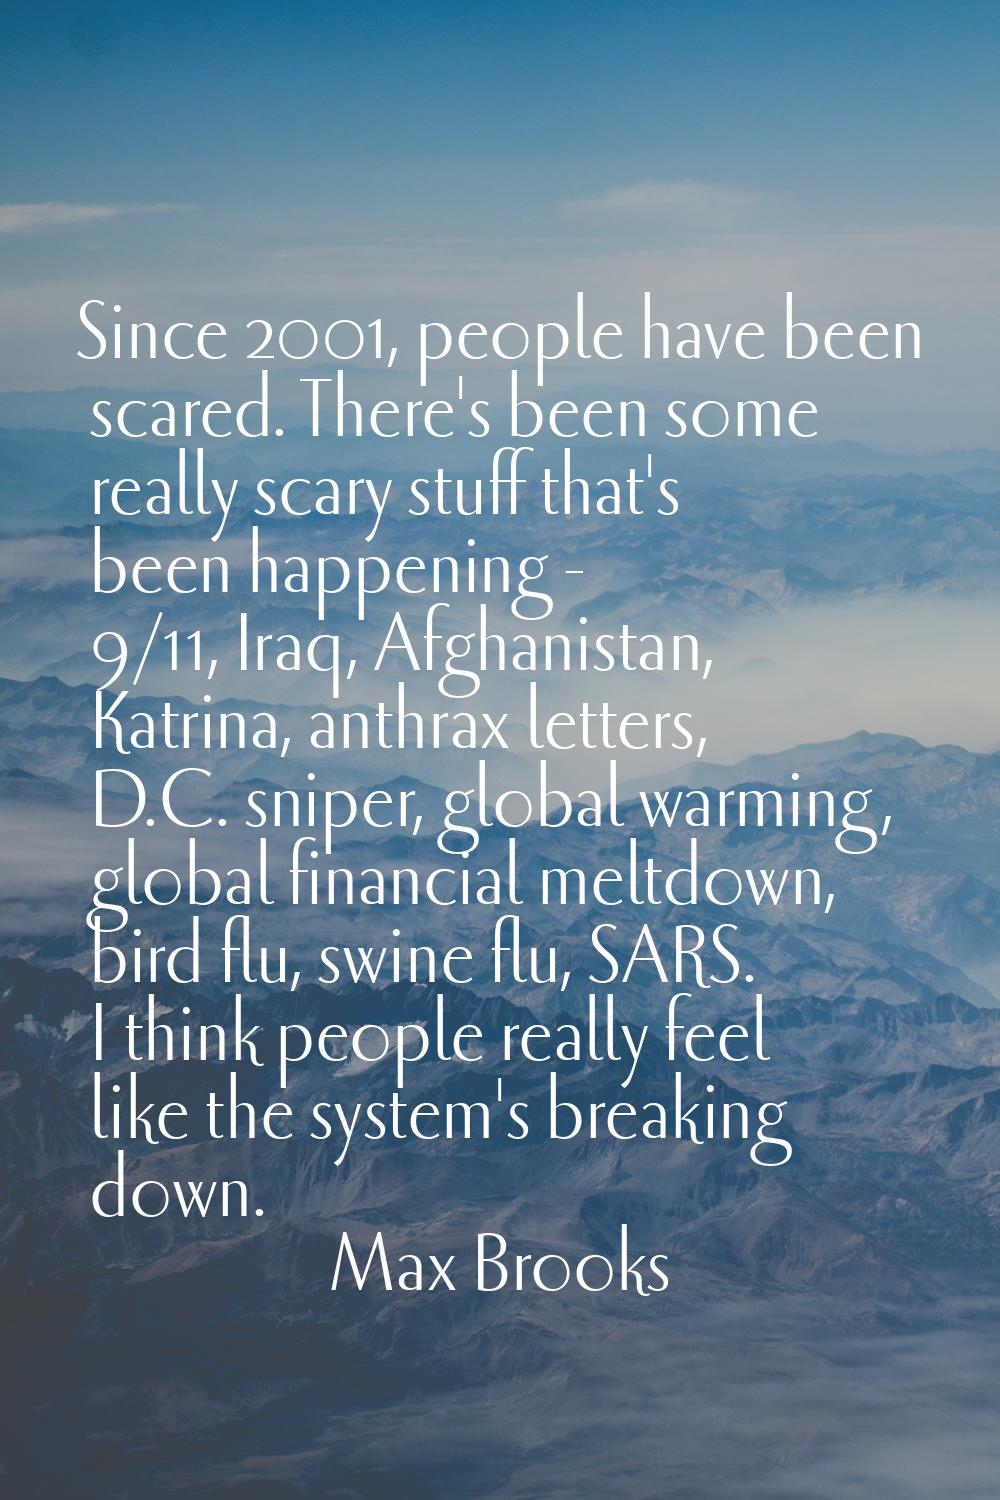 Since 2001, people have been scared. There's been some really scary stuff that's been happening - 9